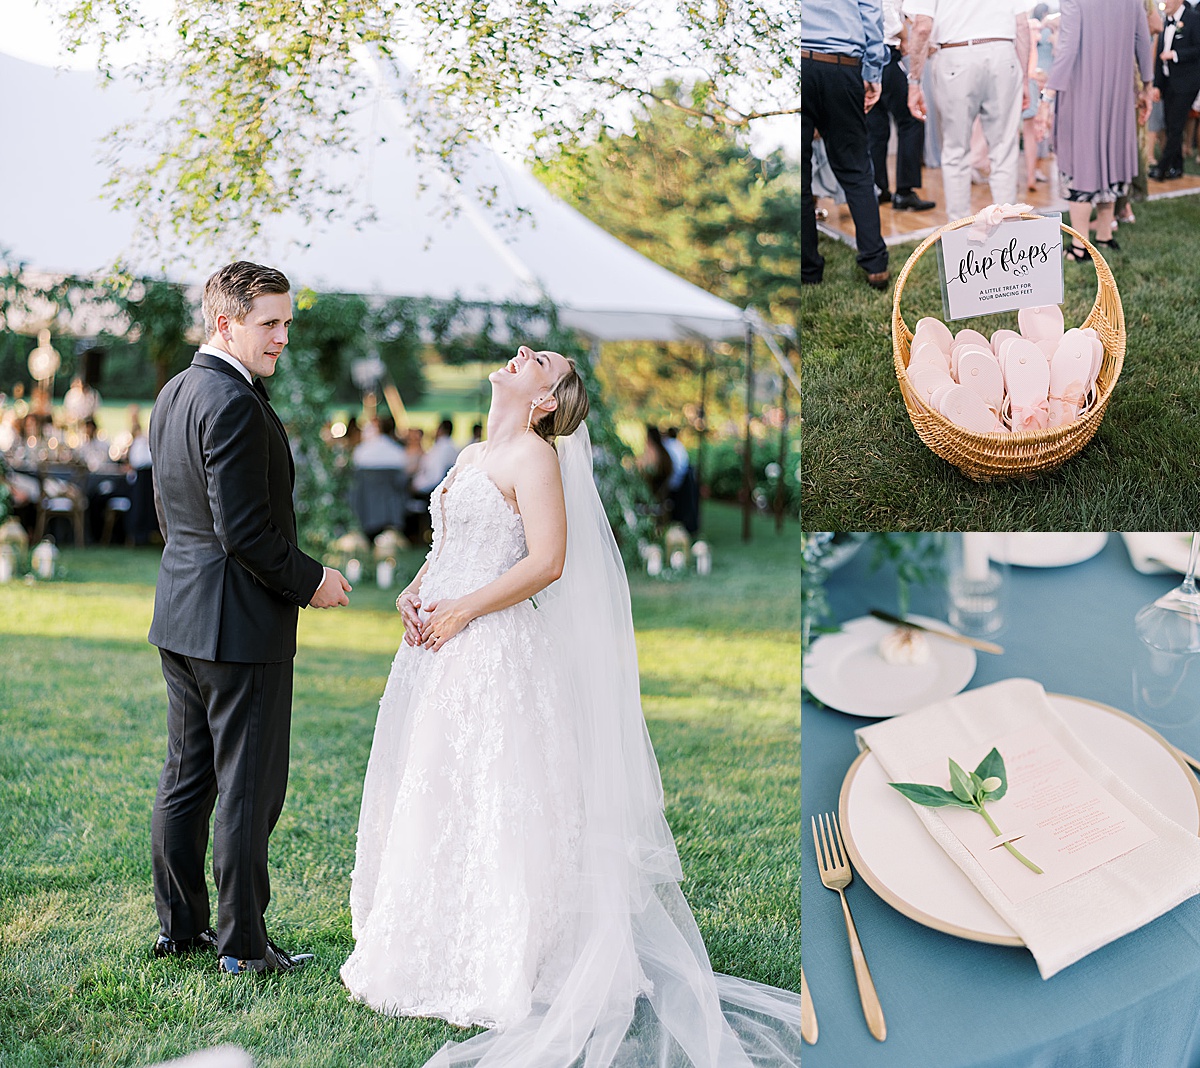 newlywed bride and groom share a laugh at outdoor summertime wedding with flipflops and classic place settings shot by destination luxury photographer